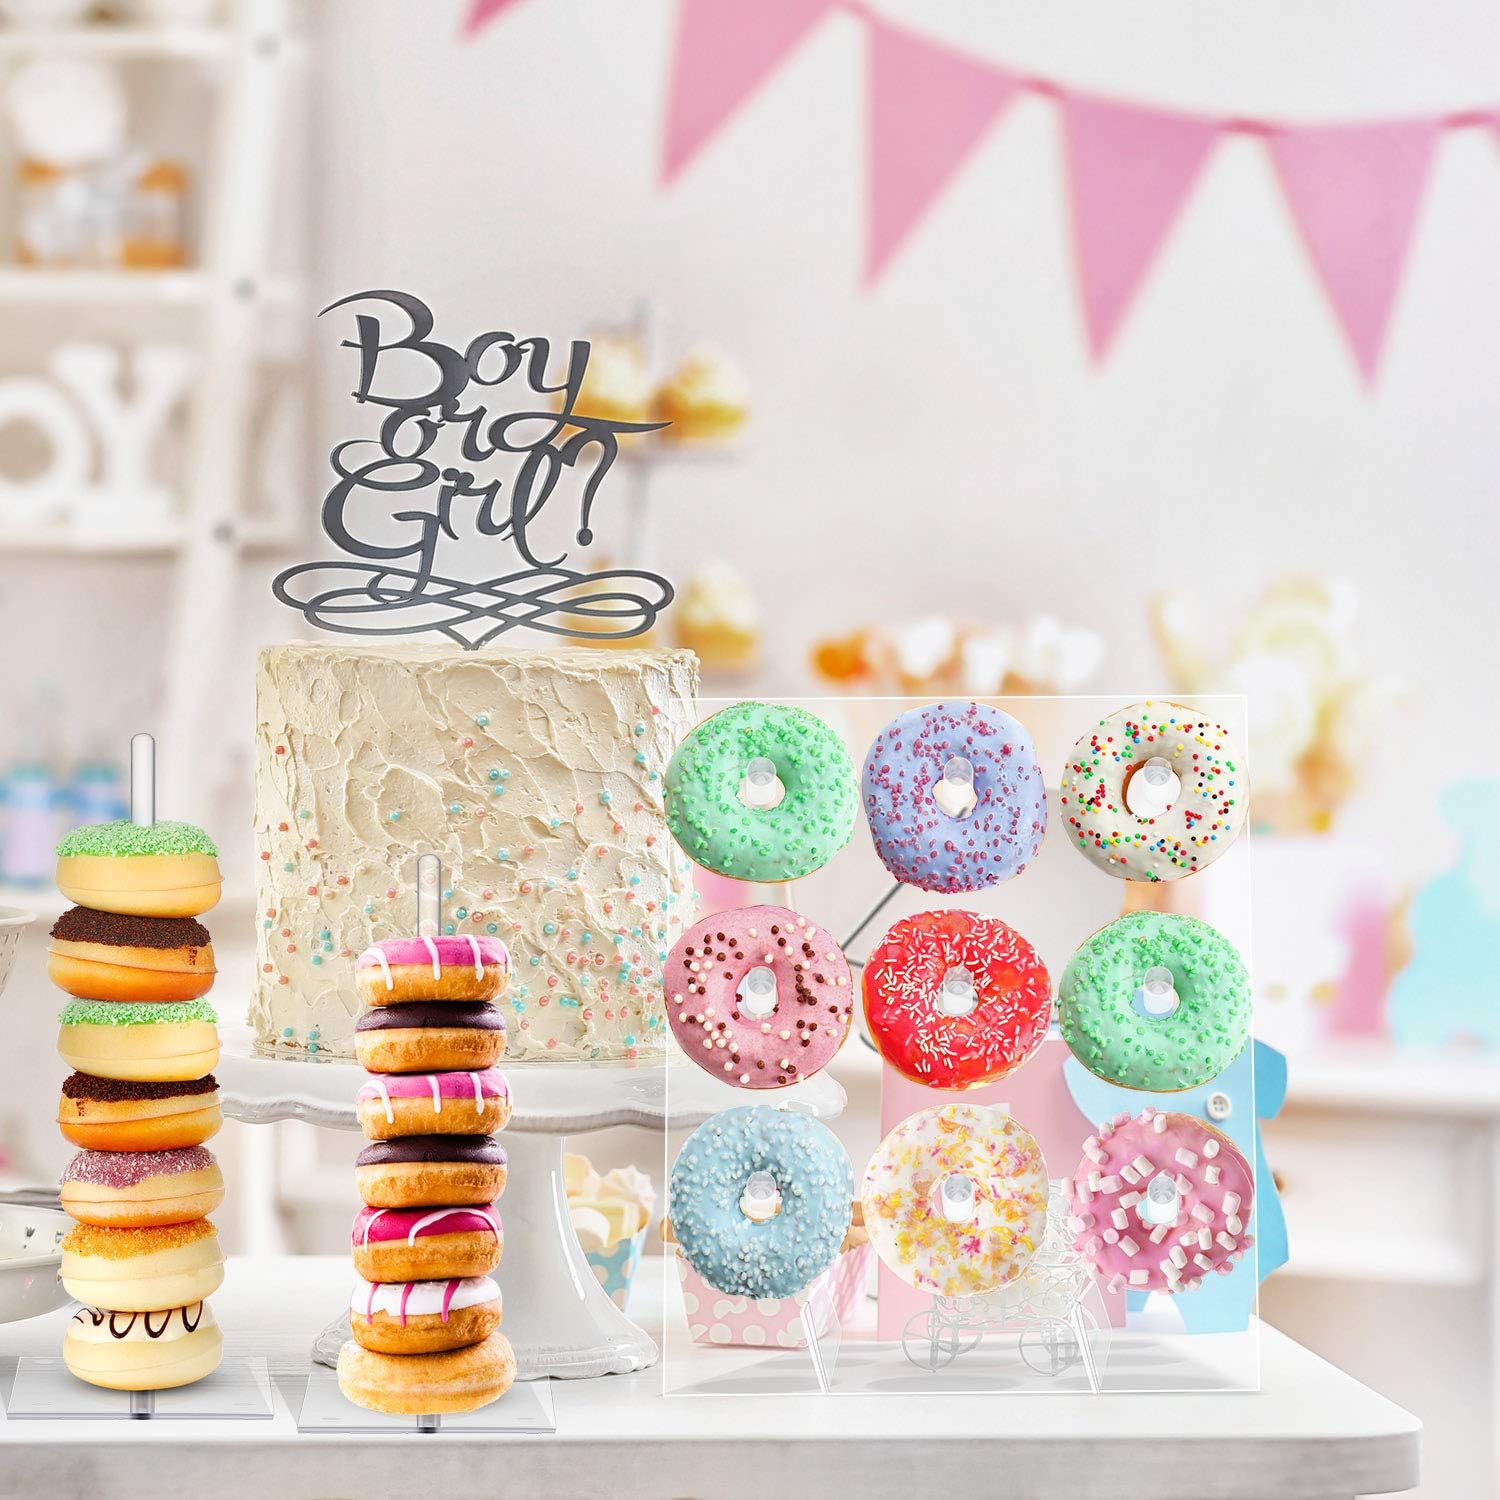 Frienda 4 Pieces Acrylic Donut Stands Clear Bagels Holder Doughnut Dessert Stand Table for Wedding Birthday Party